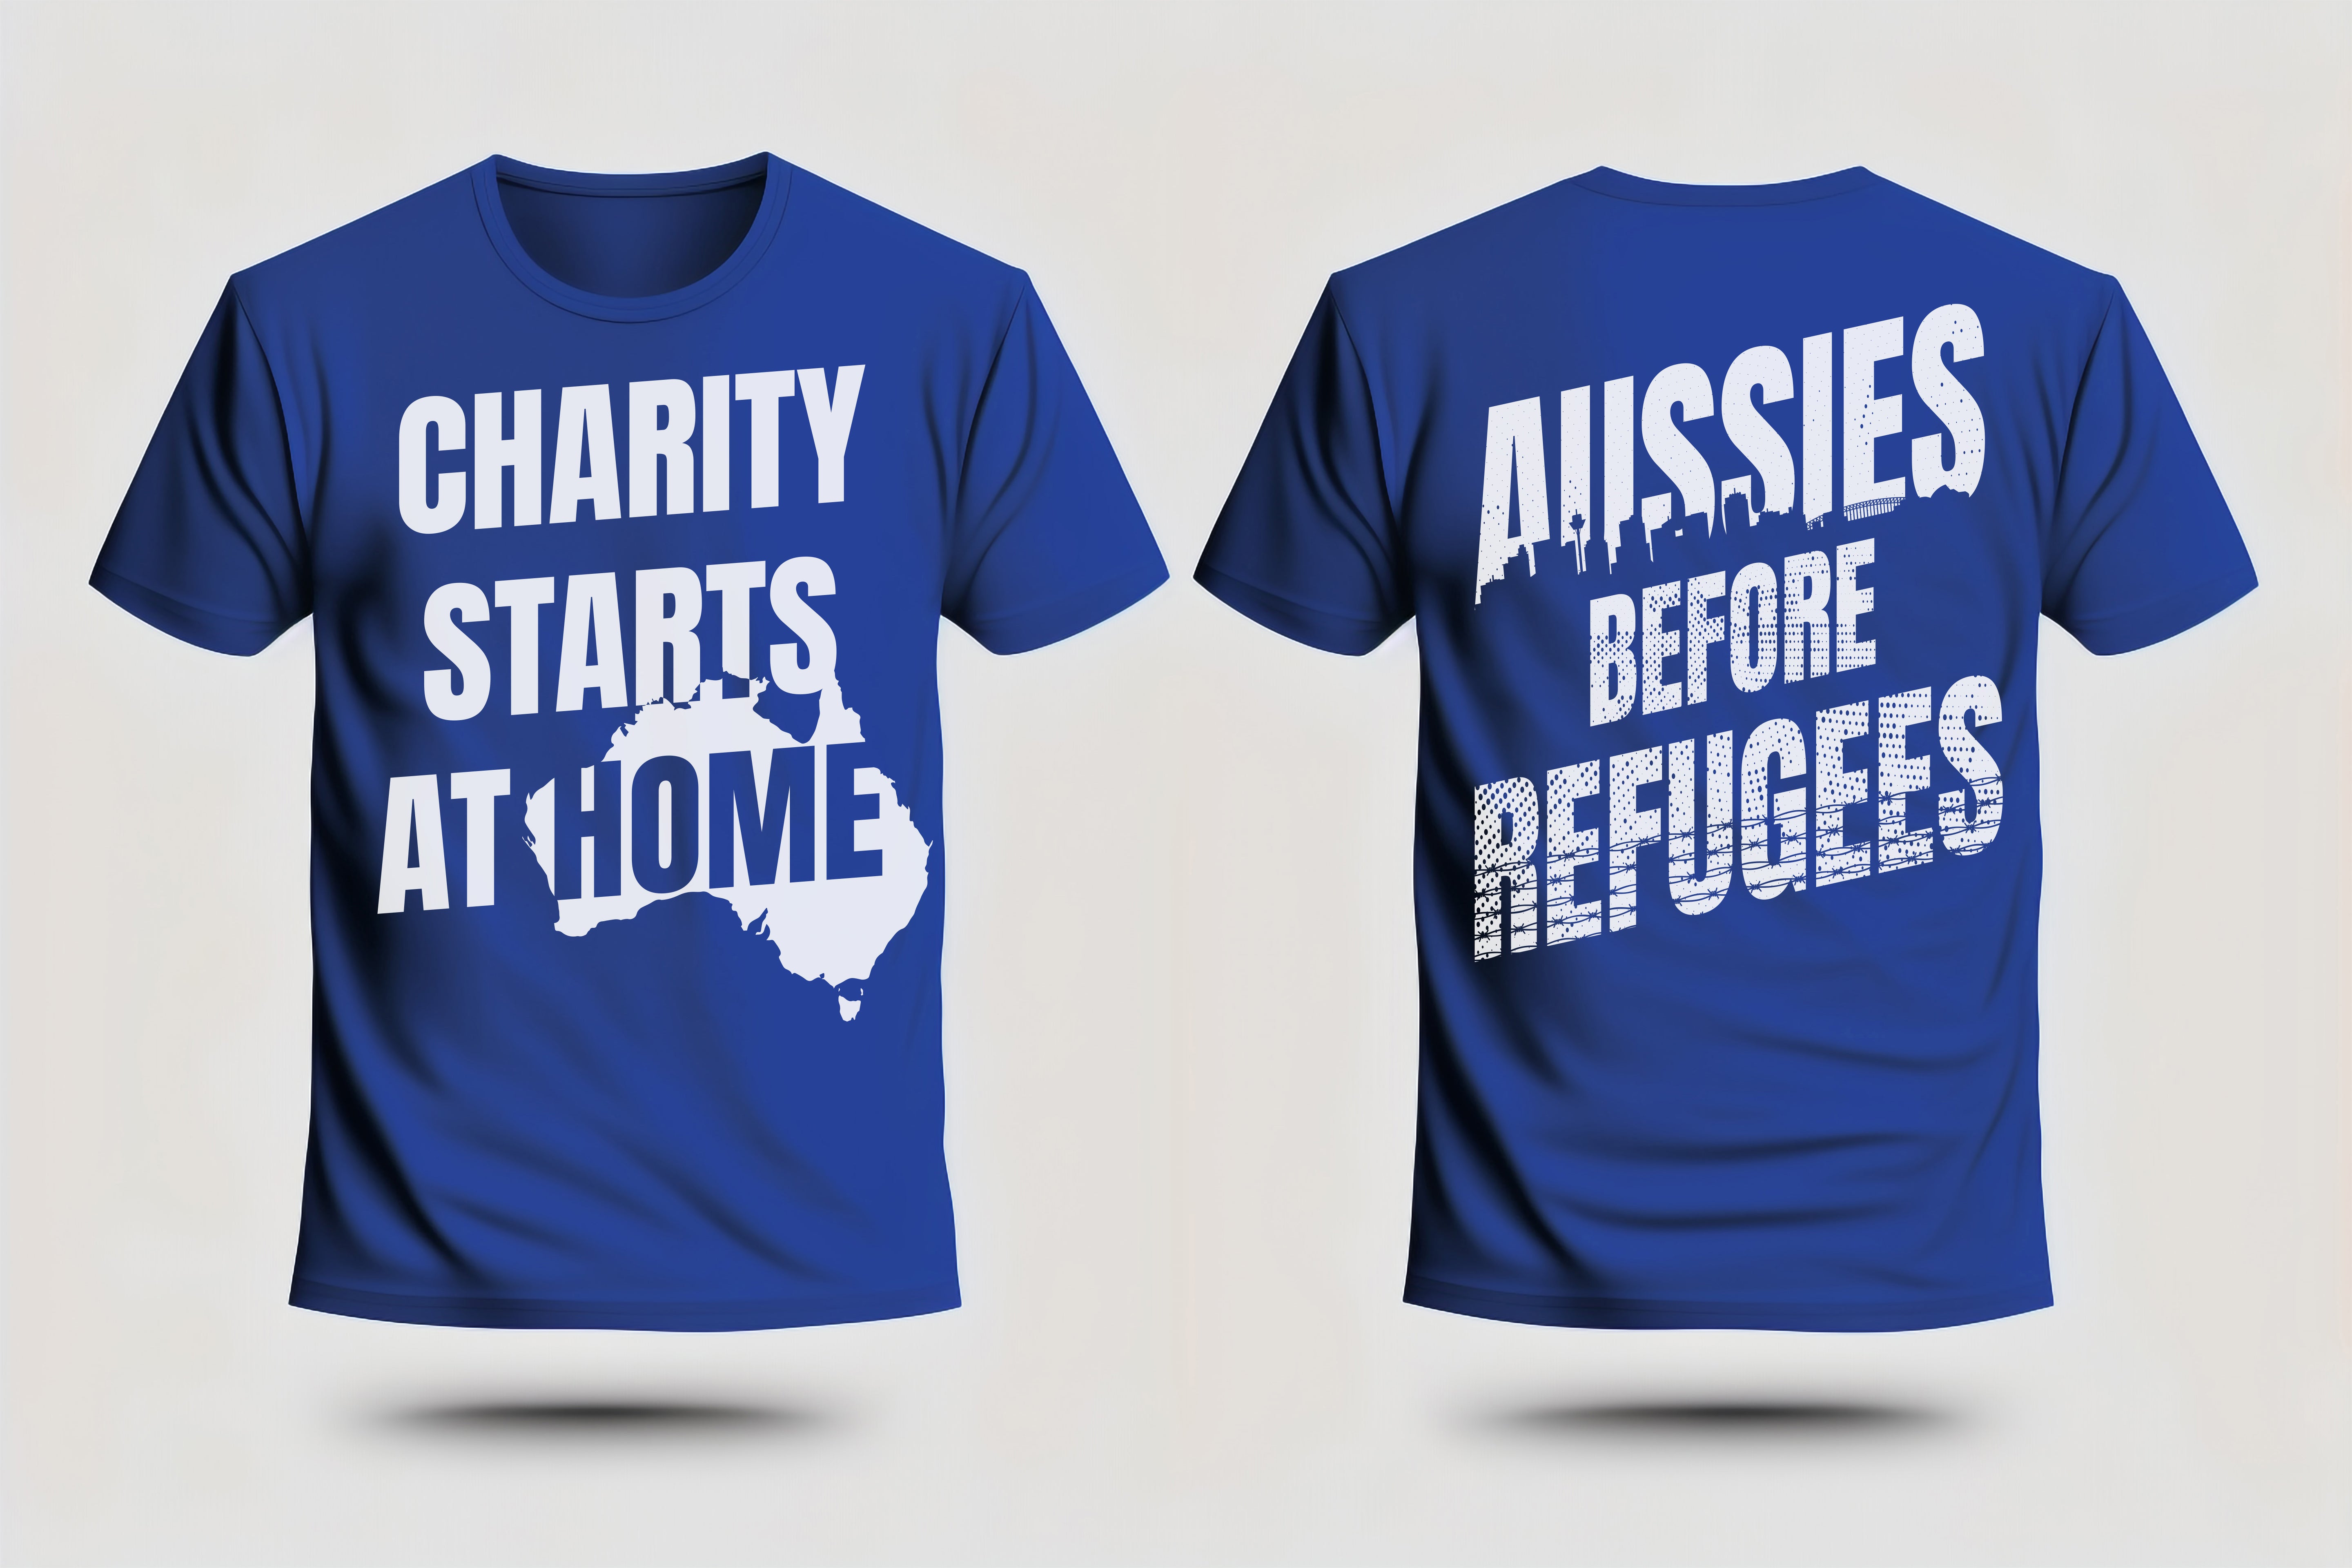 "Charity Starts At Home, Aussies Before Refugee" T-Shirt